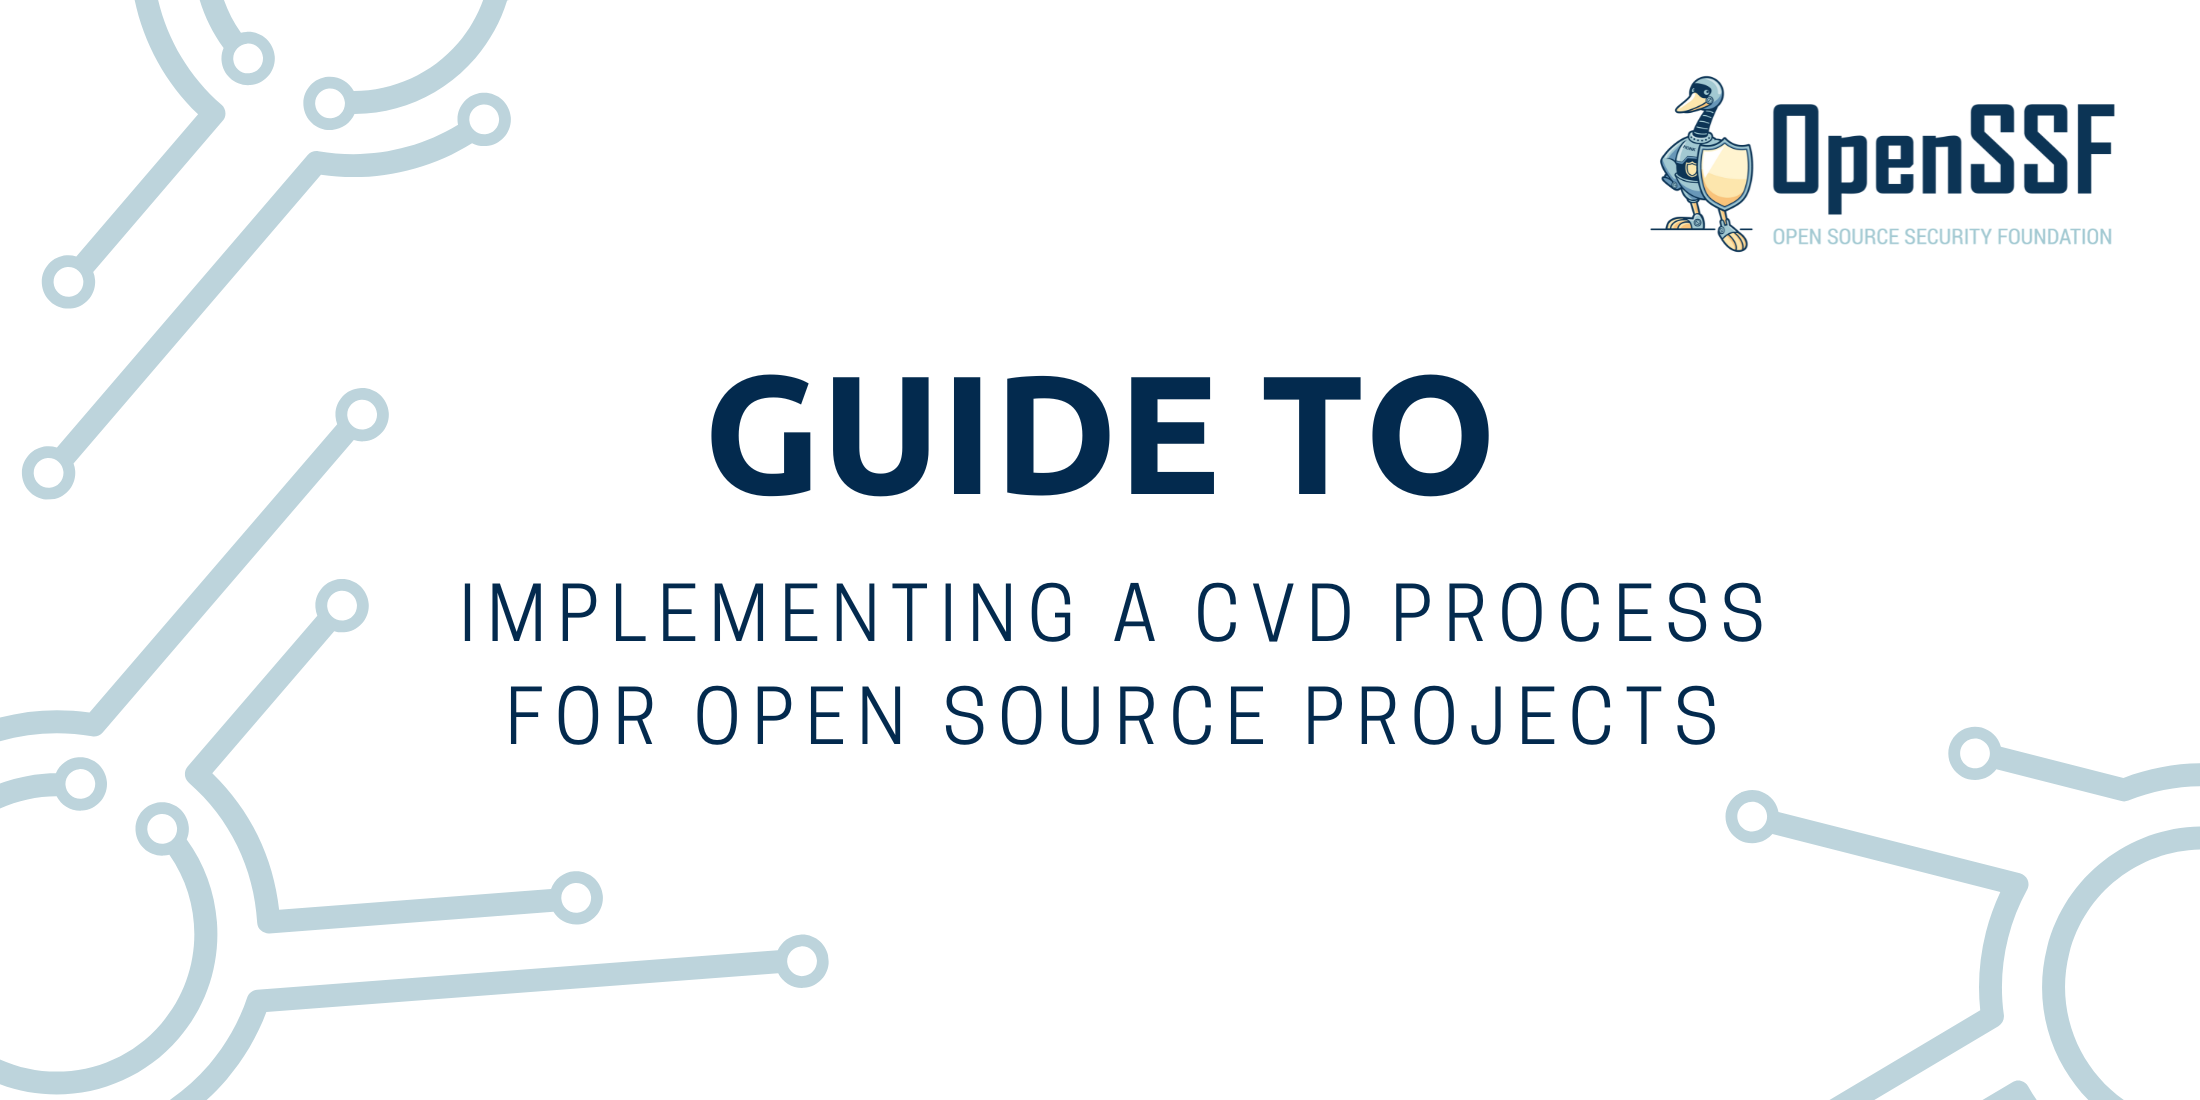 Guide to implementing a CVD process for open source projects